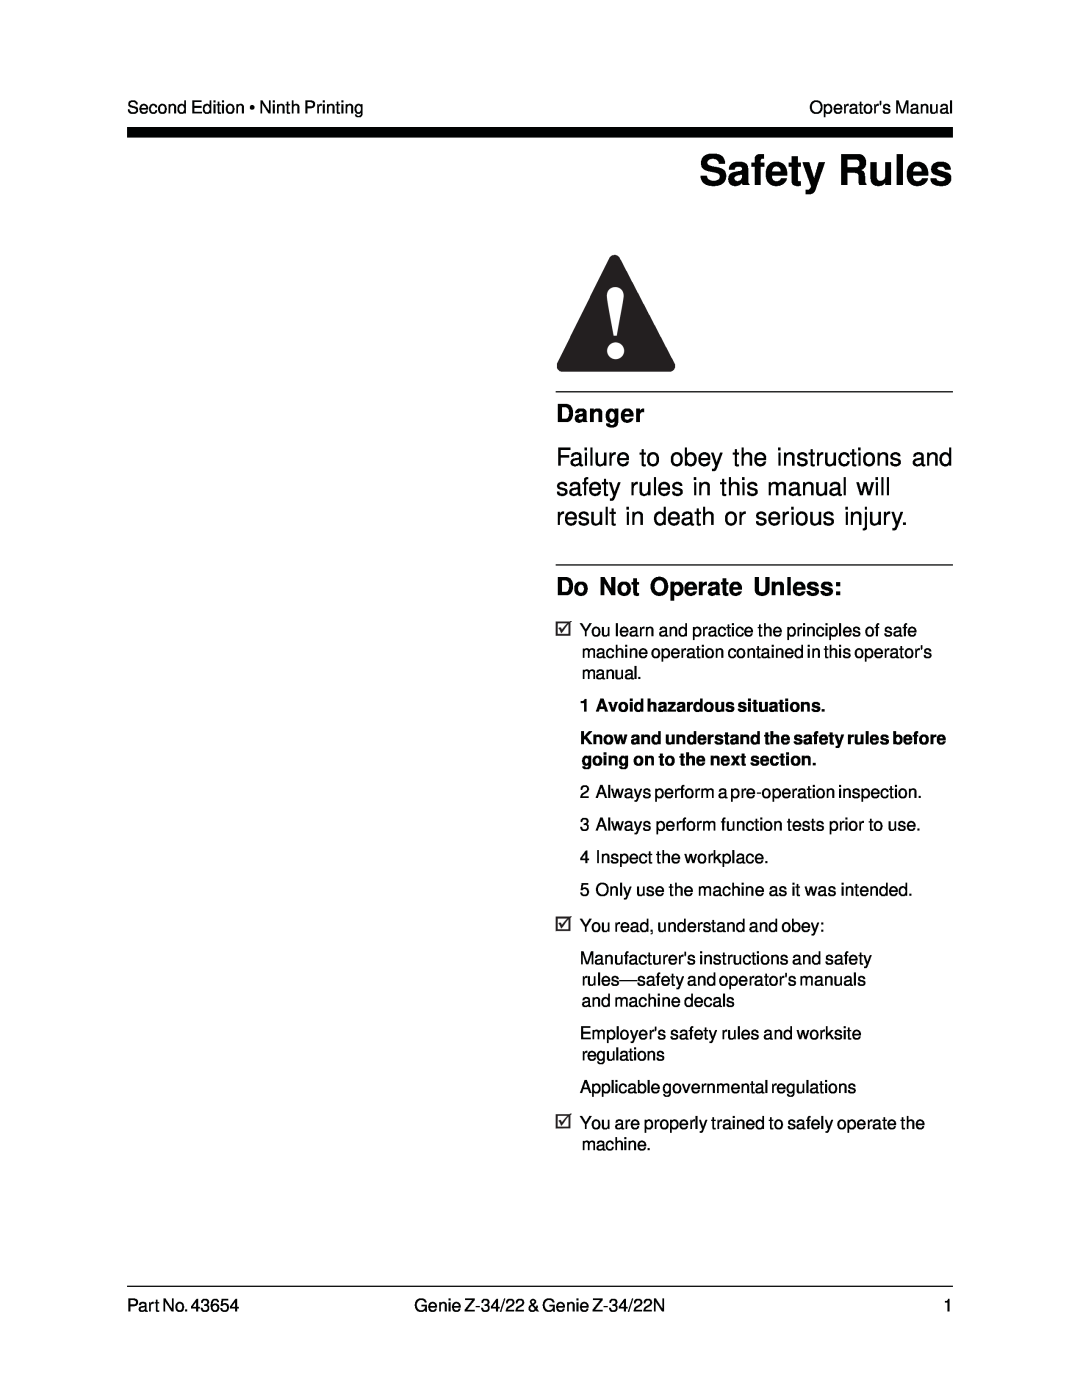 Genie Z-34, Z-22N manual Safety Rules, Danger, Do Not Operate Unless, Avoid hazardous situations 